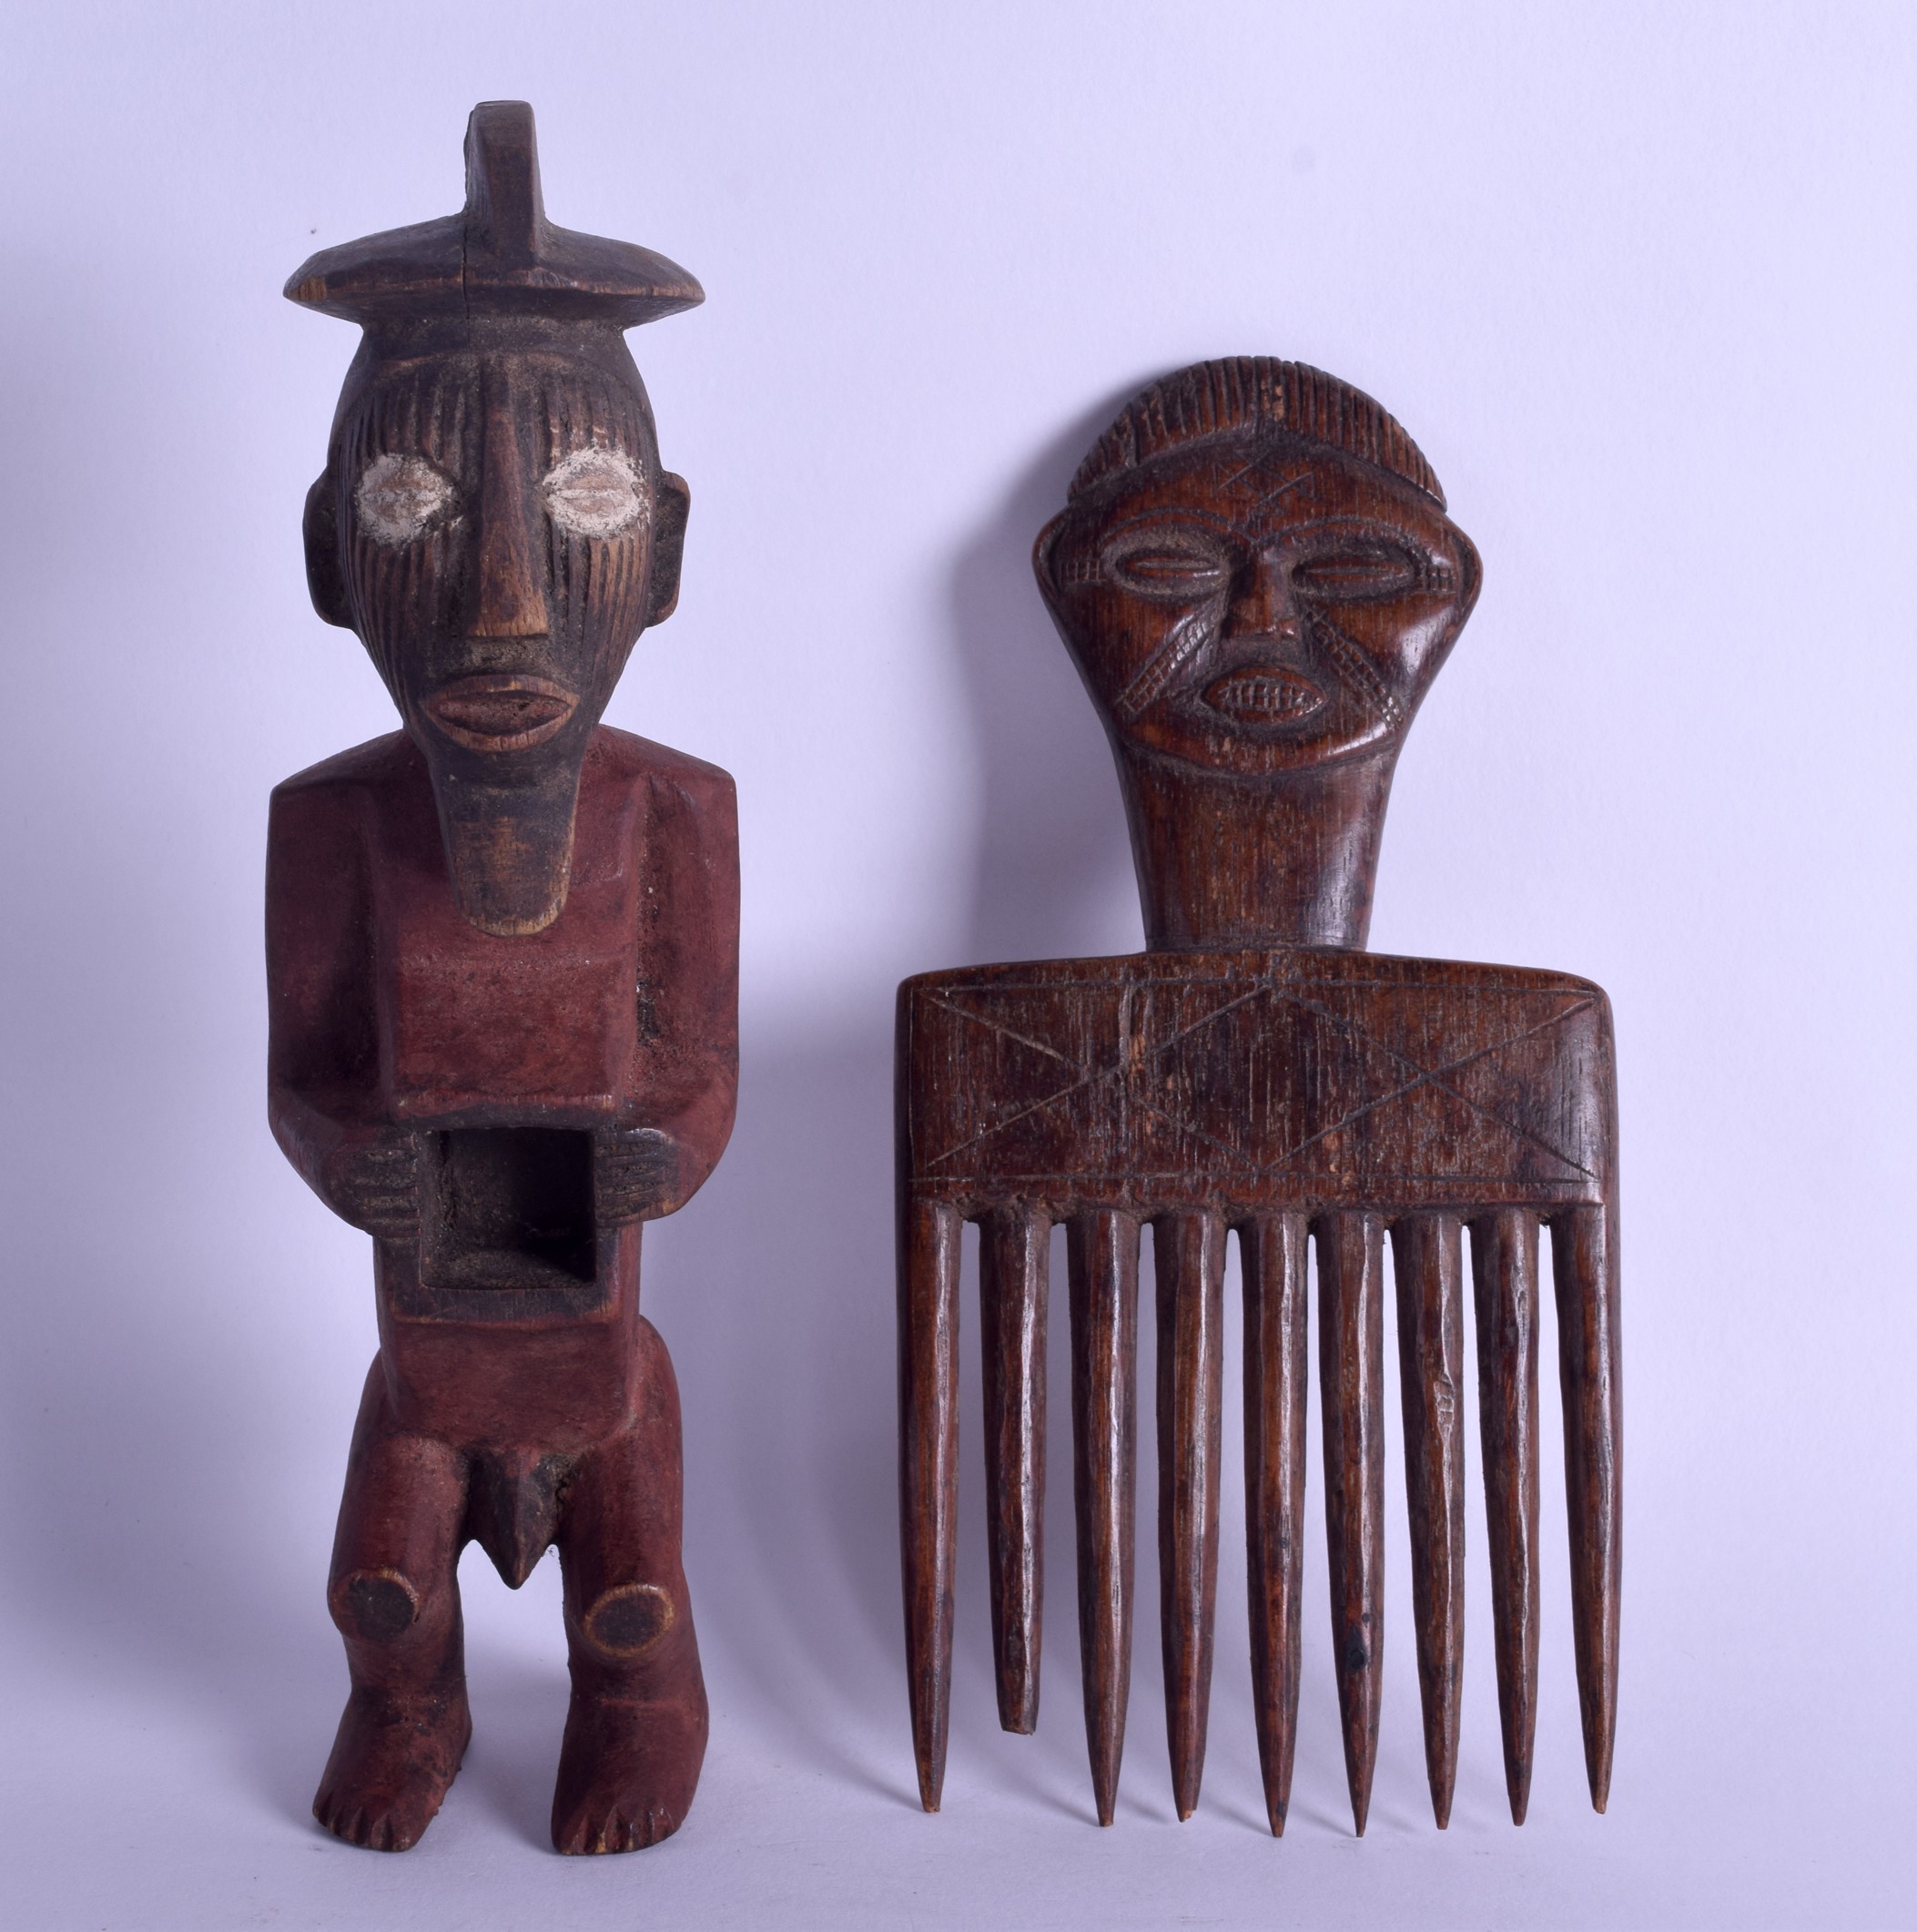 AN EARLY 20TH CENTURY AFRICAN CARVED TRIBAL FIGURAL COMB together with a polychromed wooden